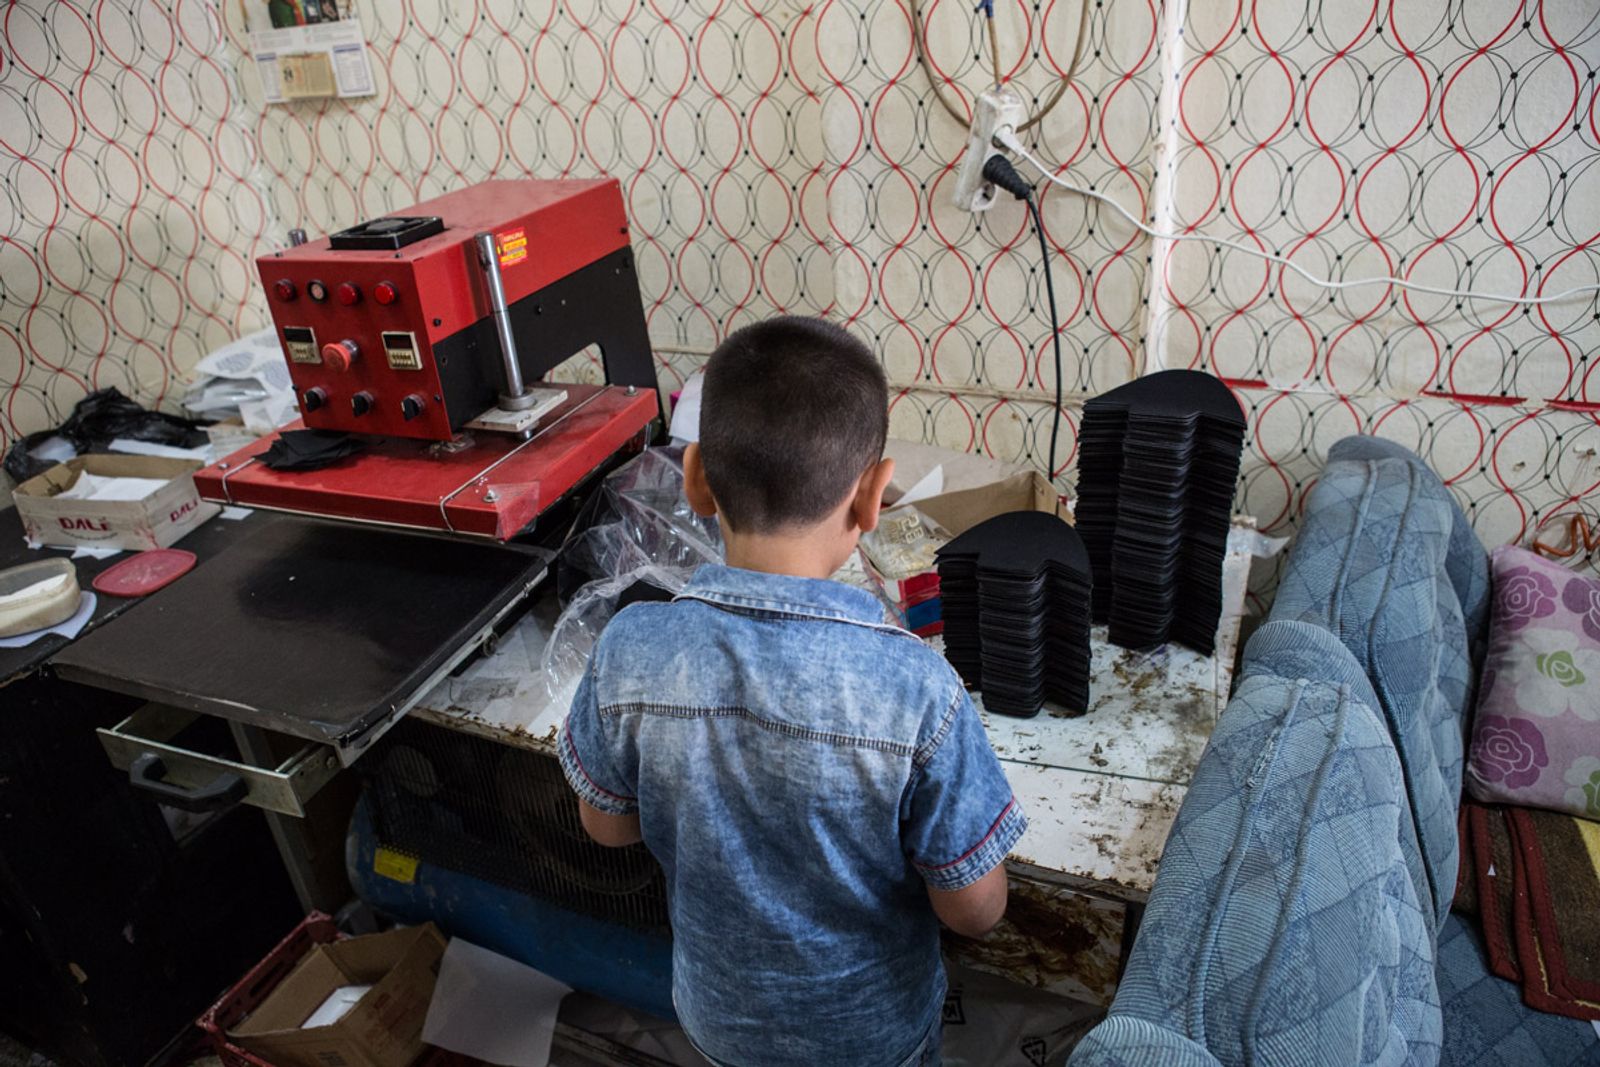 © Valerio Muscella - A Syrian 9 years old boy works in a workshop where he produces decoration for shoes. Gaziantep, May 2016.